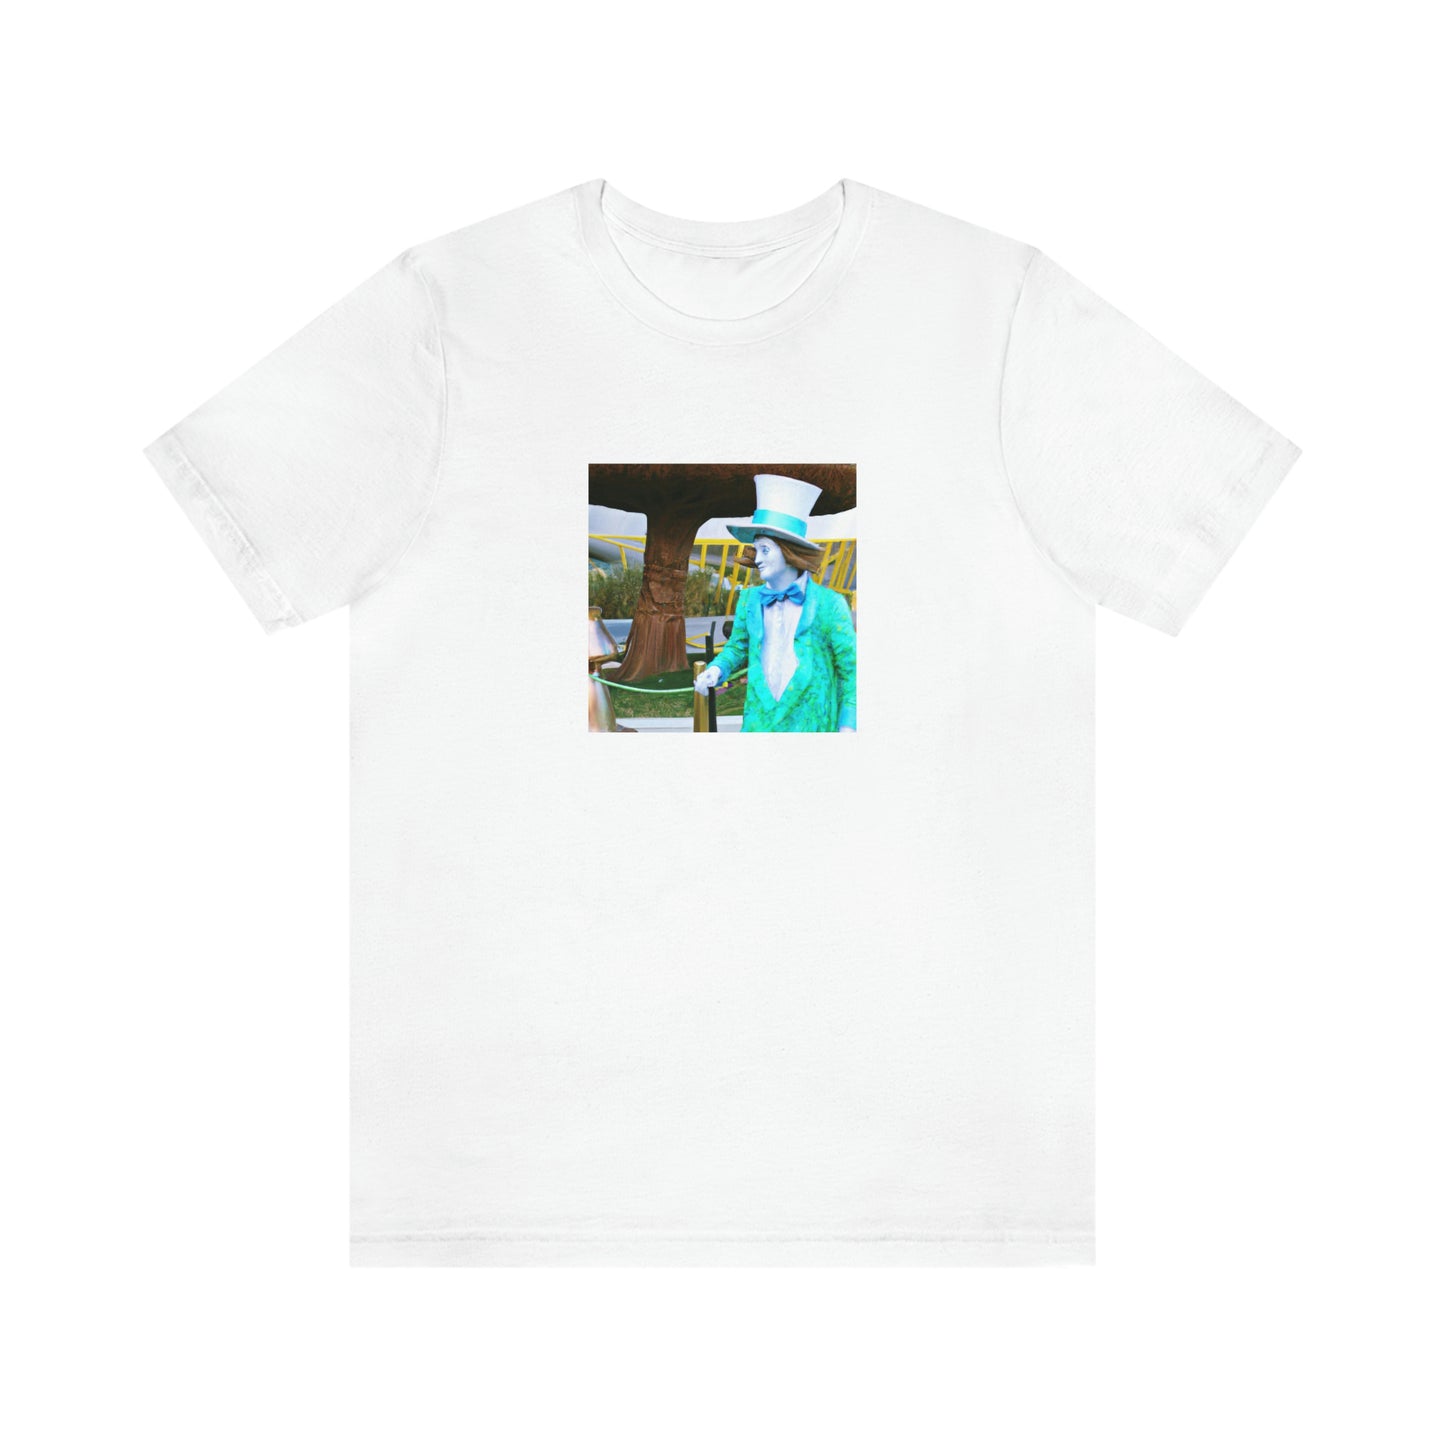 store

A-Chase in Cyberland - tshirt